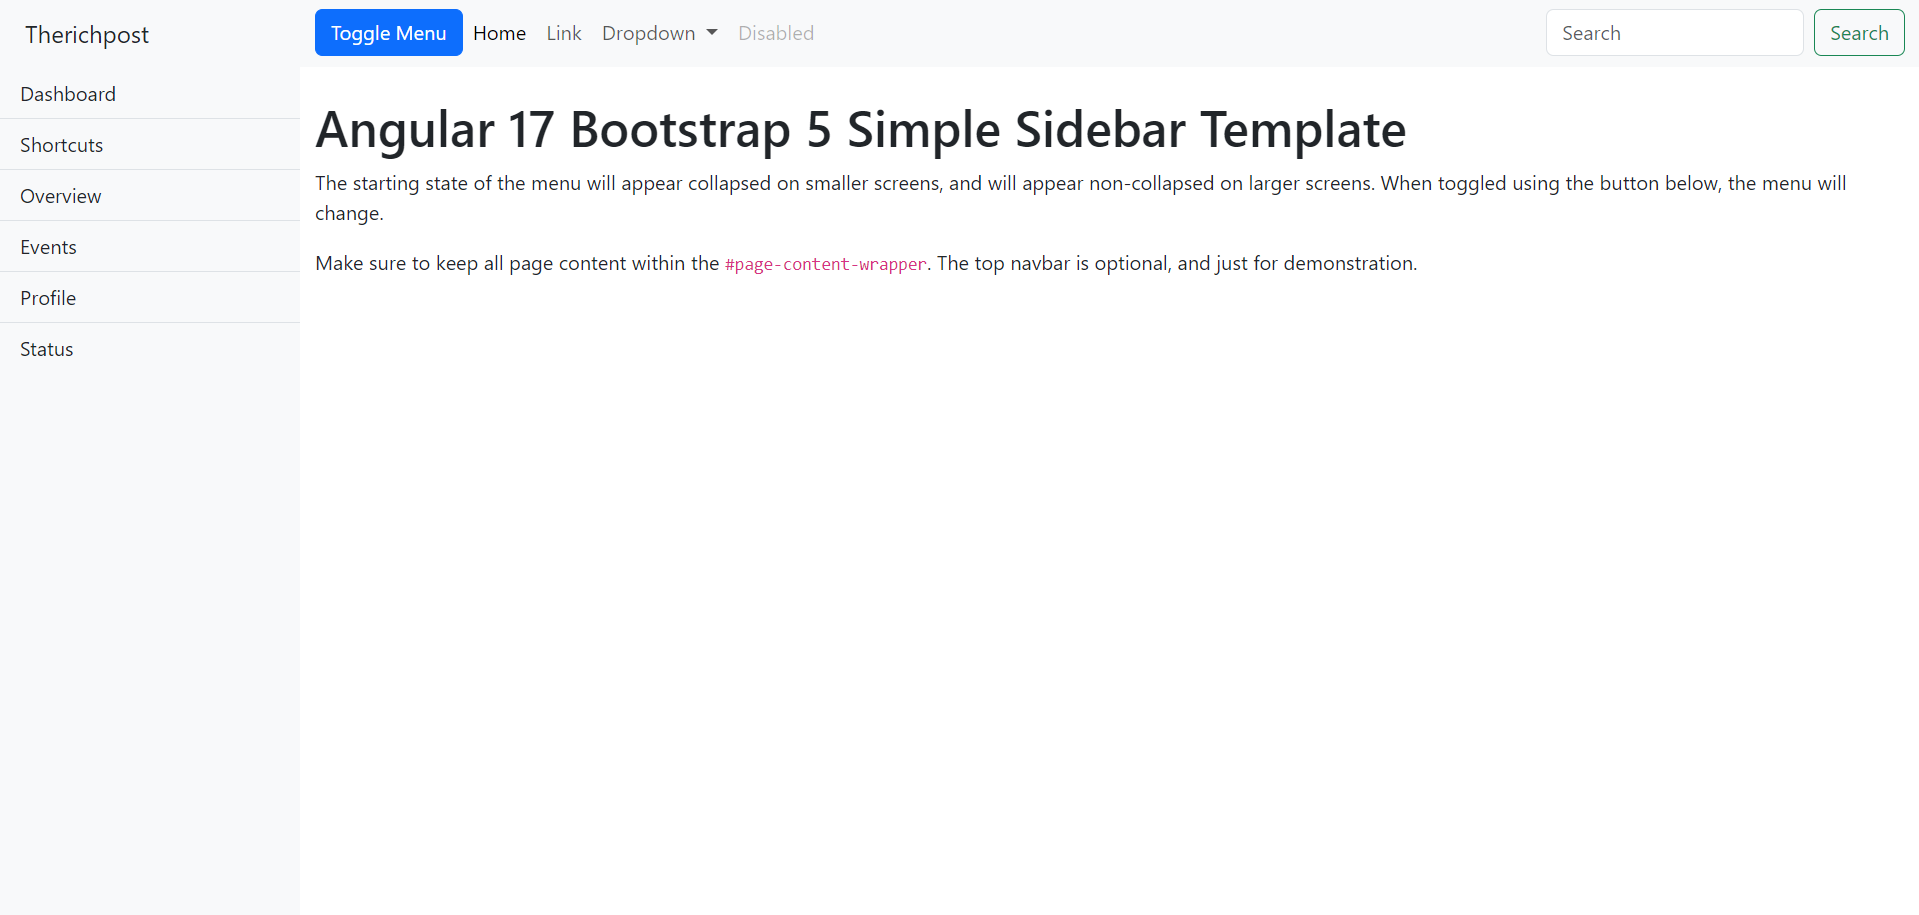 How to make simple admin sidebar template with Bootstrap 5 and Angular17?